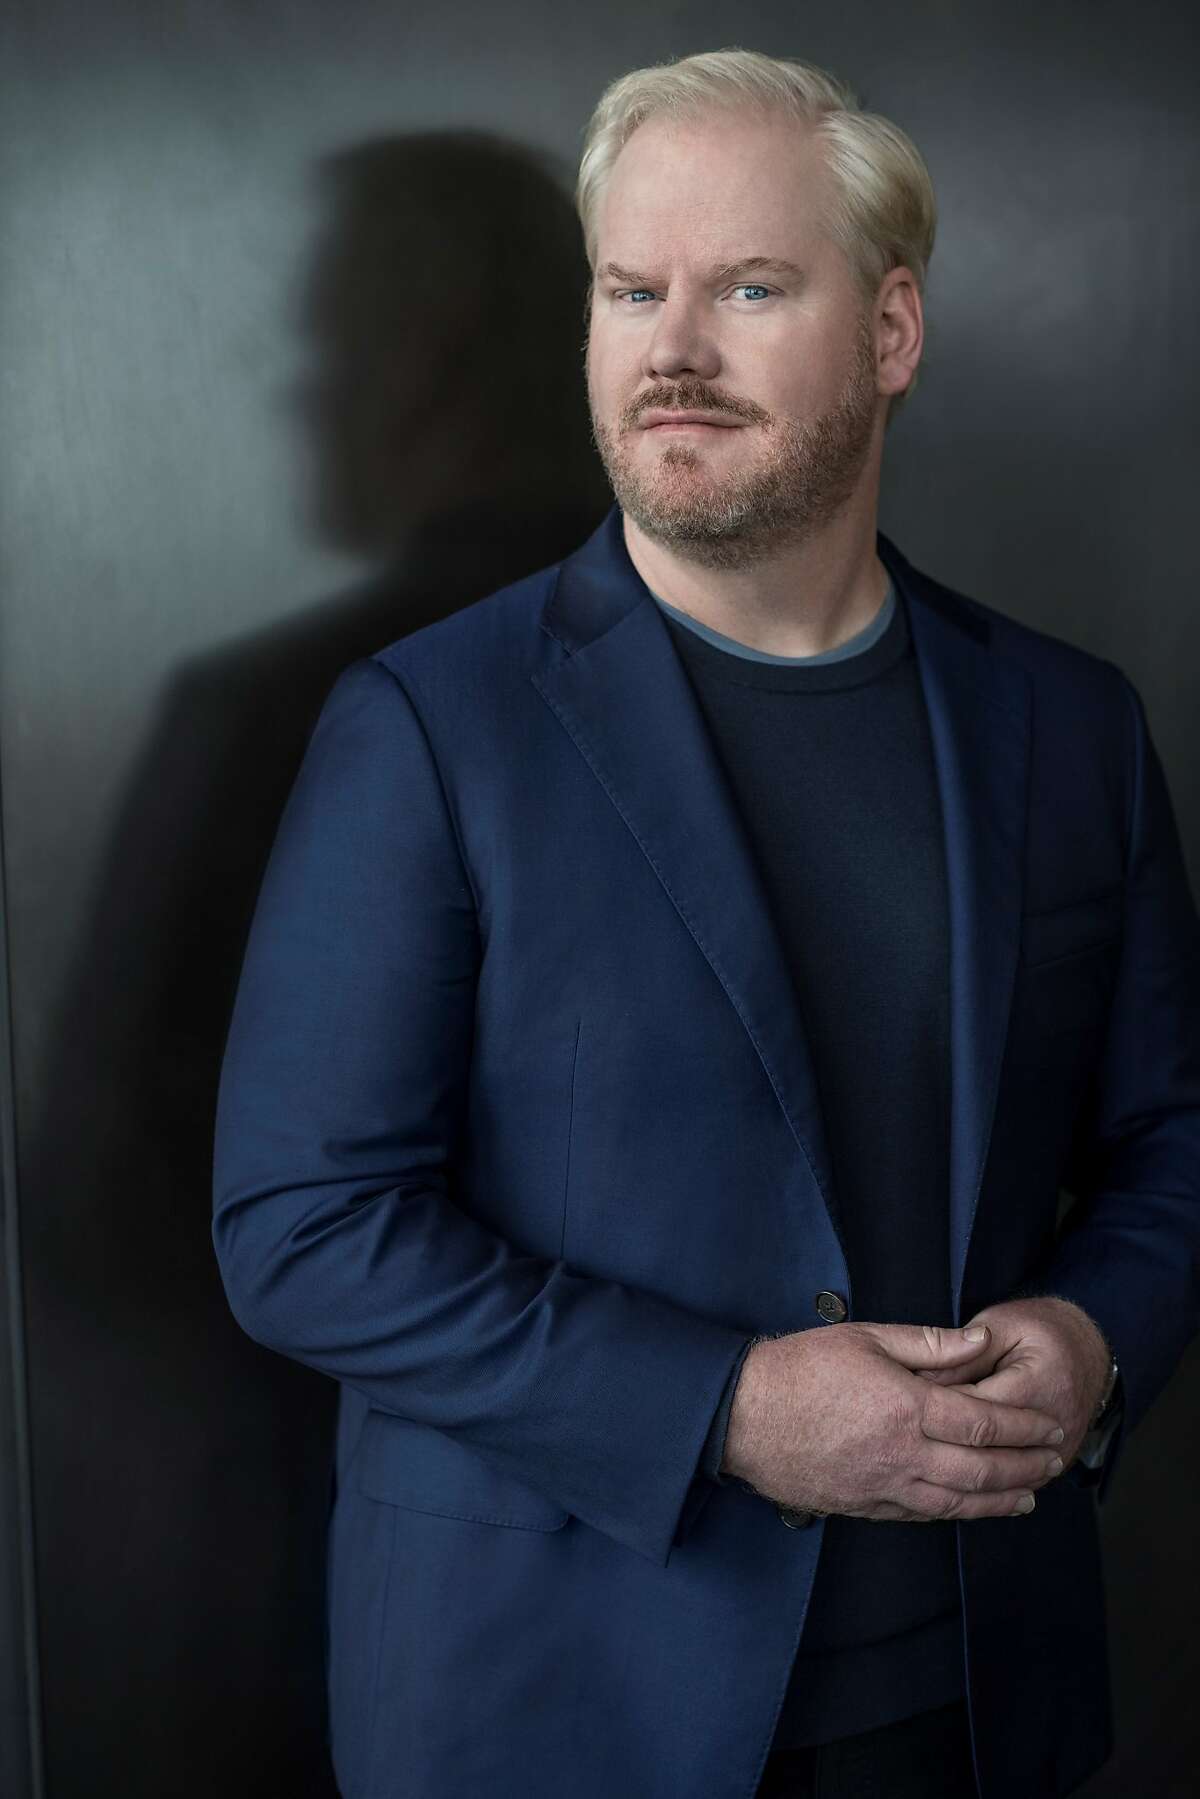 Jim Gaffigan will perform in his wholesome way at Shoreline Amphitheatre on Sunday, Sept. 17.